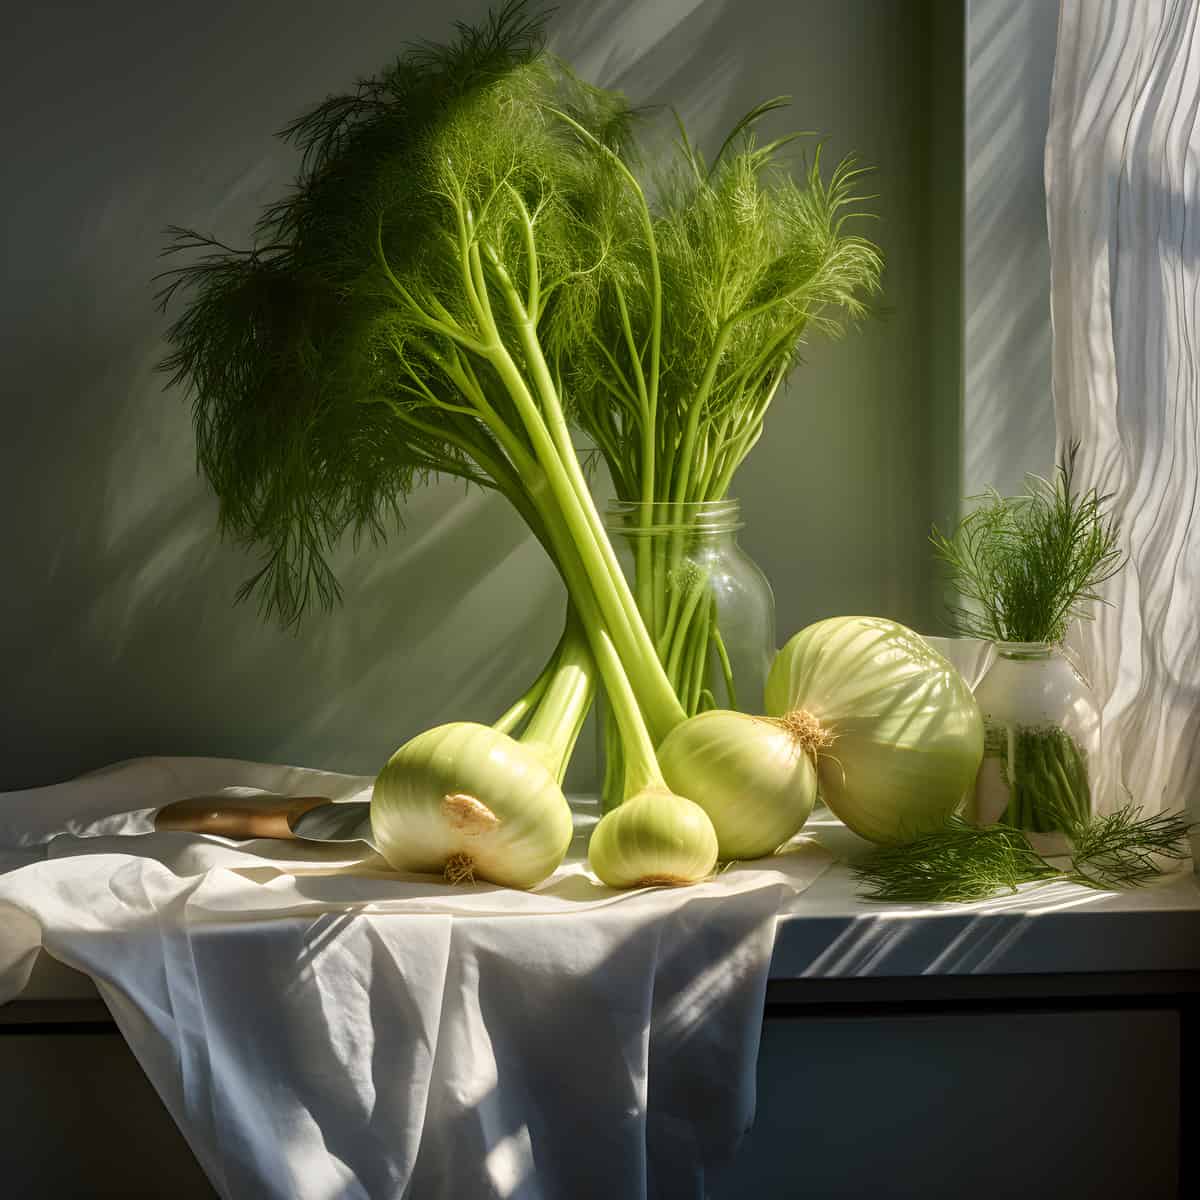 Fennel on a kitchen counter